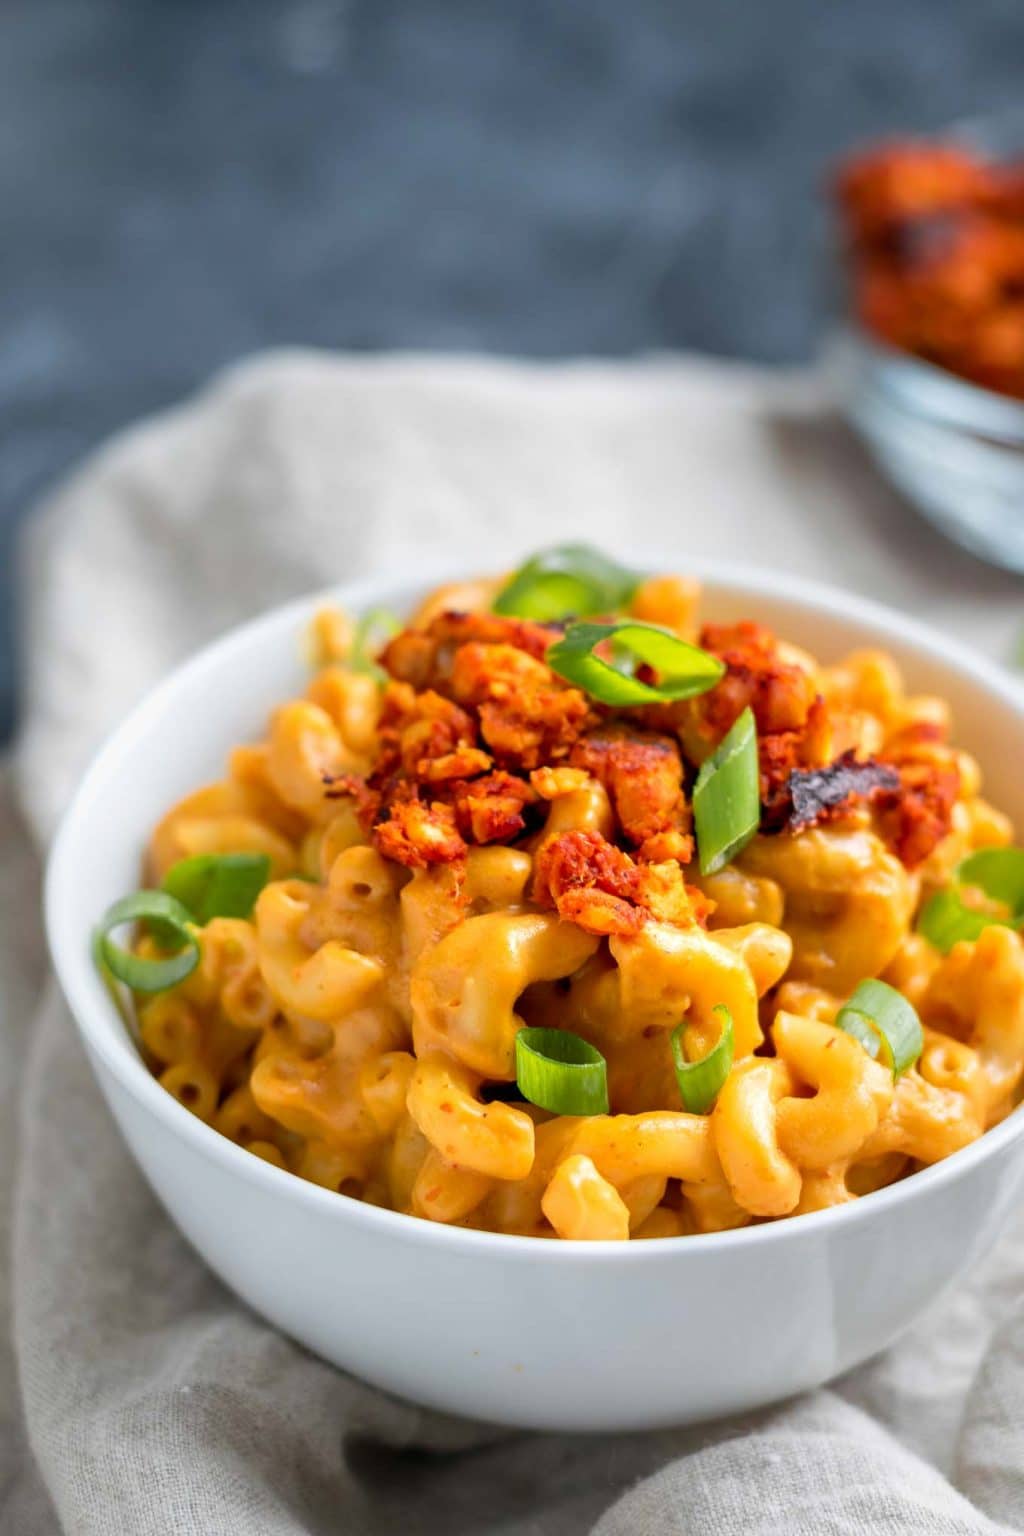 Vegan chipotle mac and cheese with spicy tempeh crumbles, garnished with scallion greens